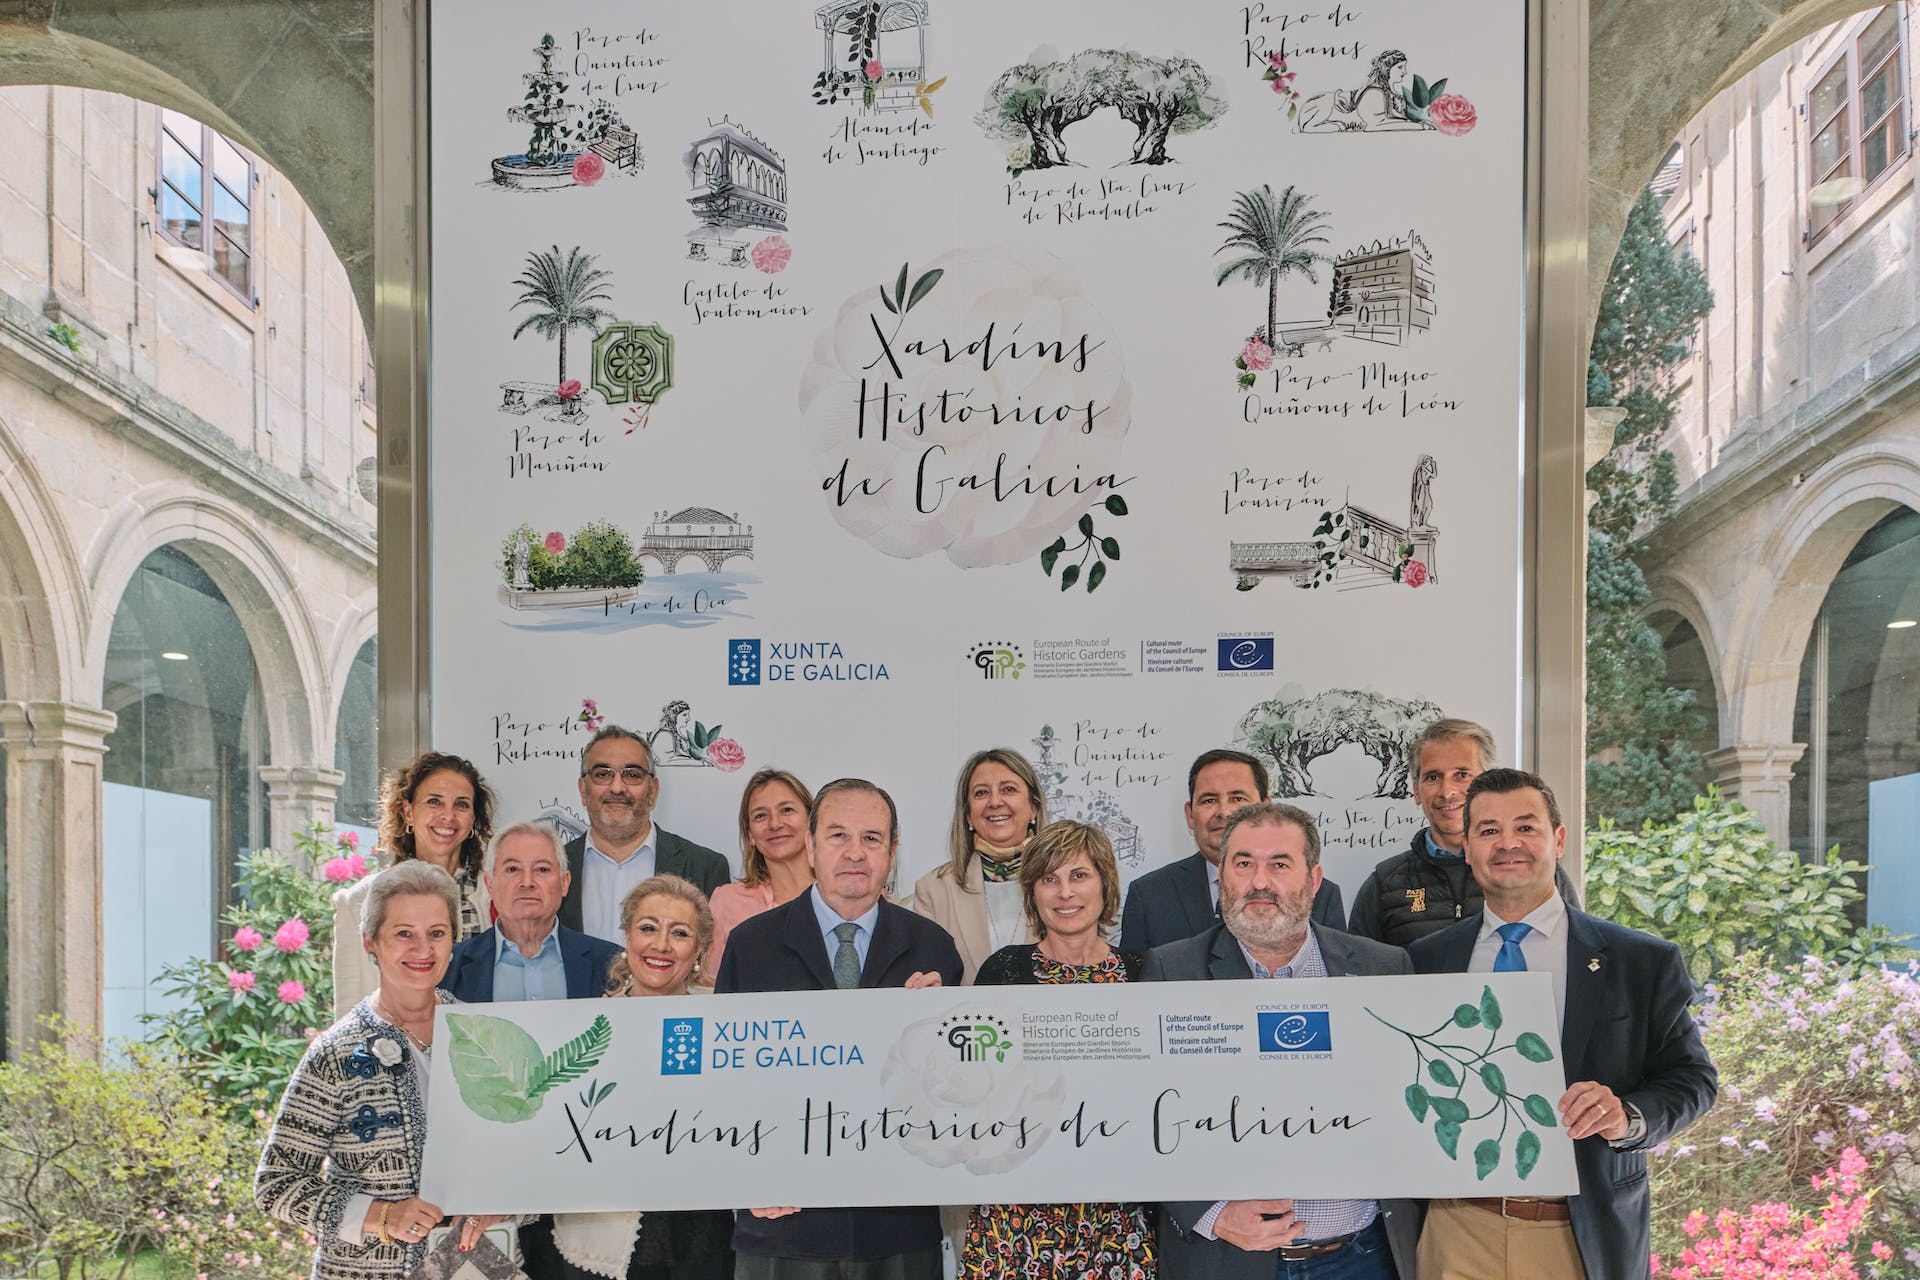 The ERHG and Xunta de Galicia have awarded the enamel plaques and diplomas to the Historic Gardens of Galicia as members of the ERHG